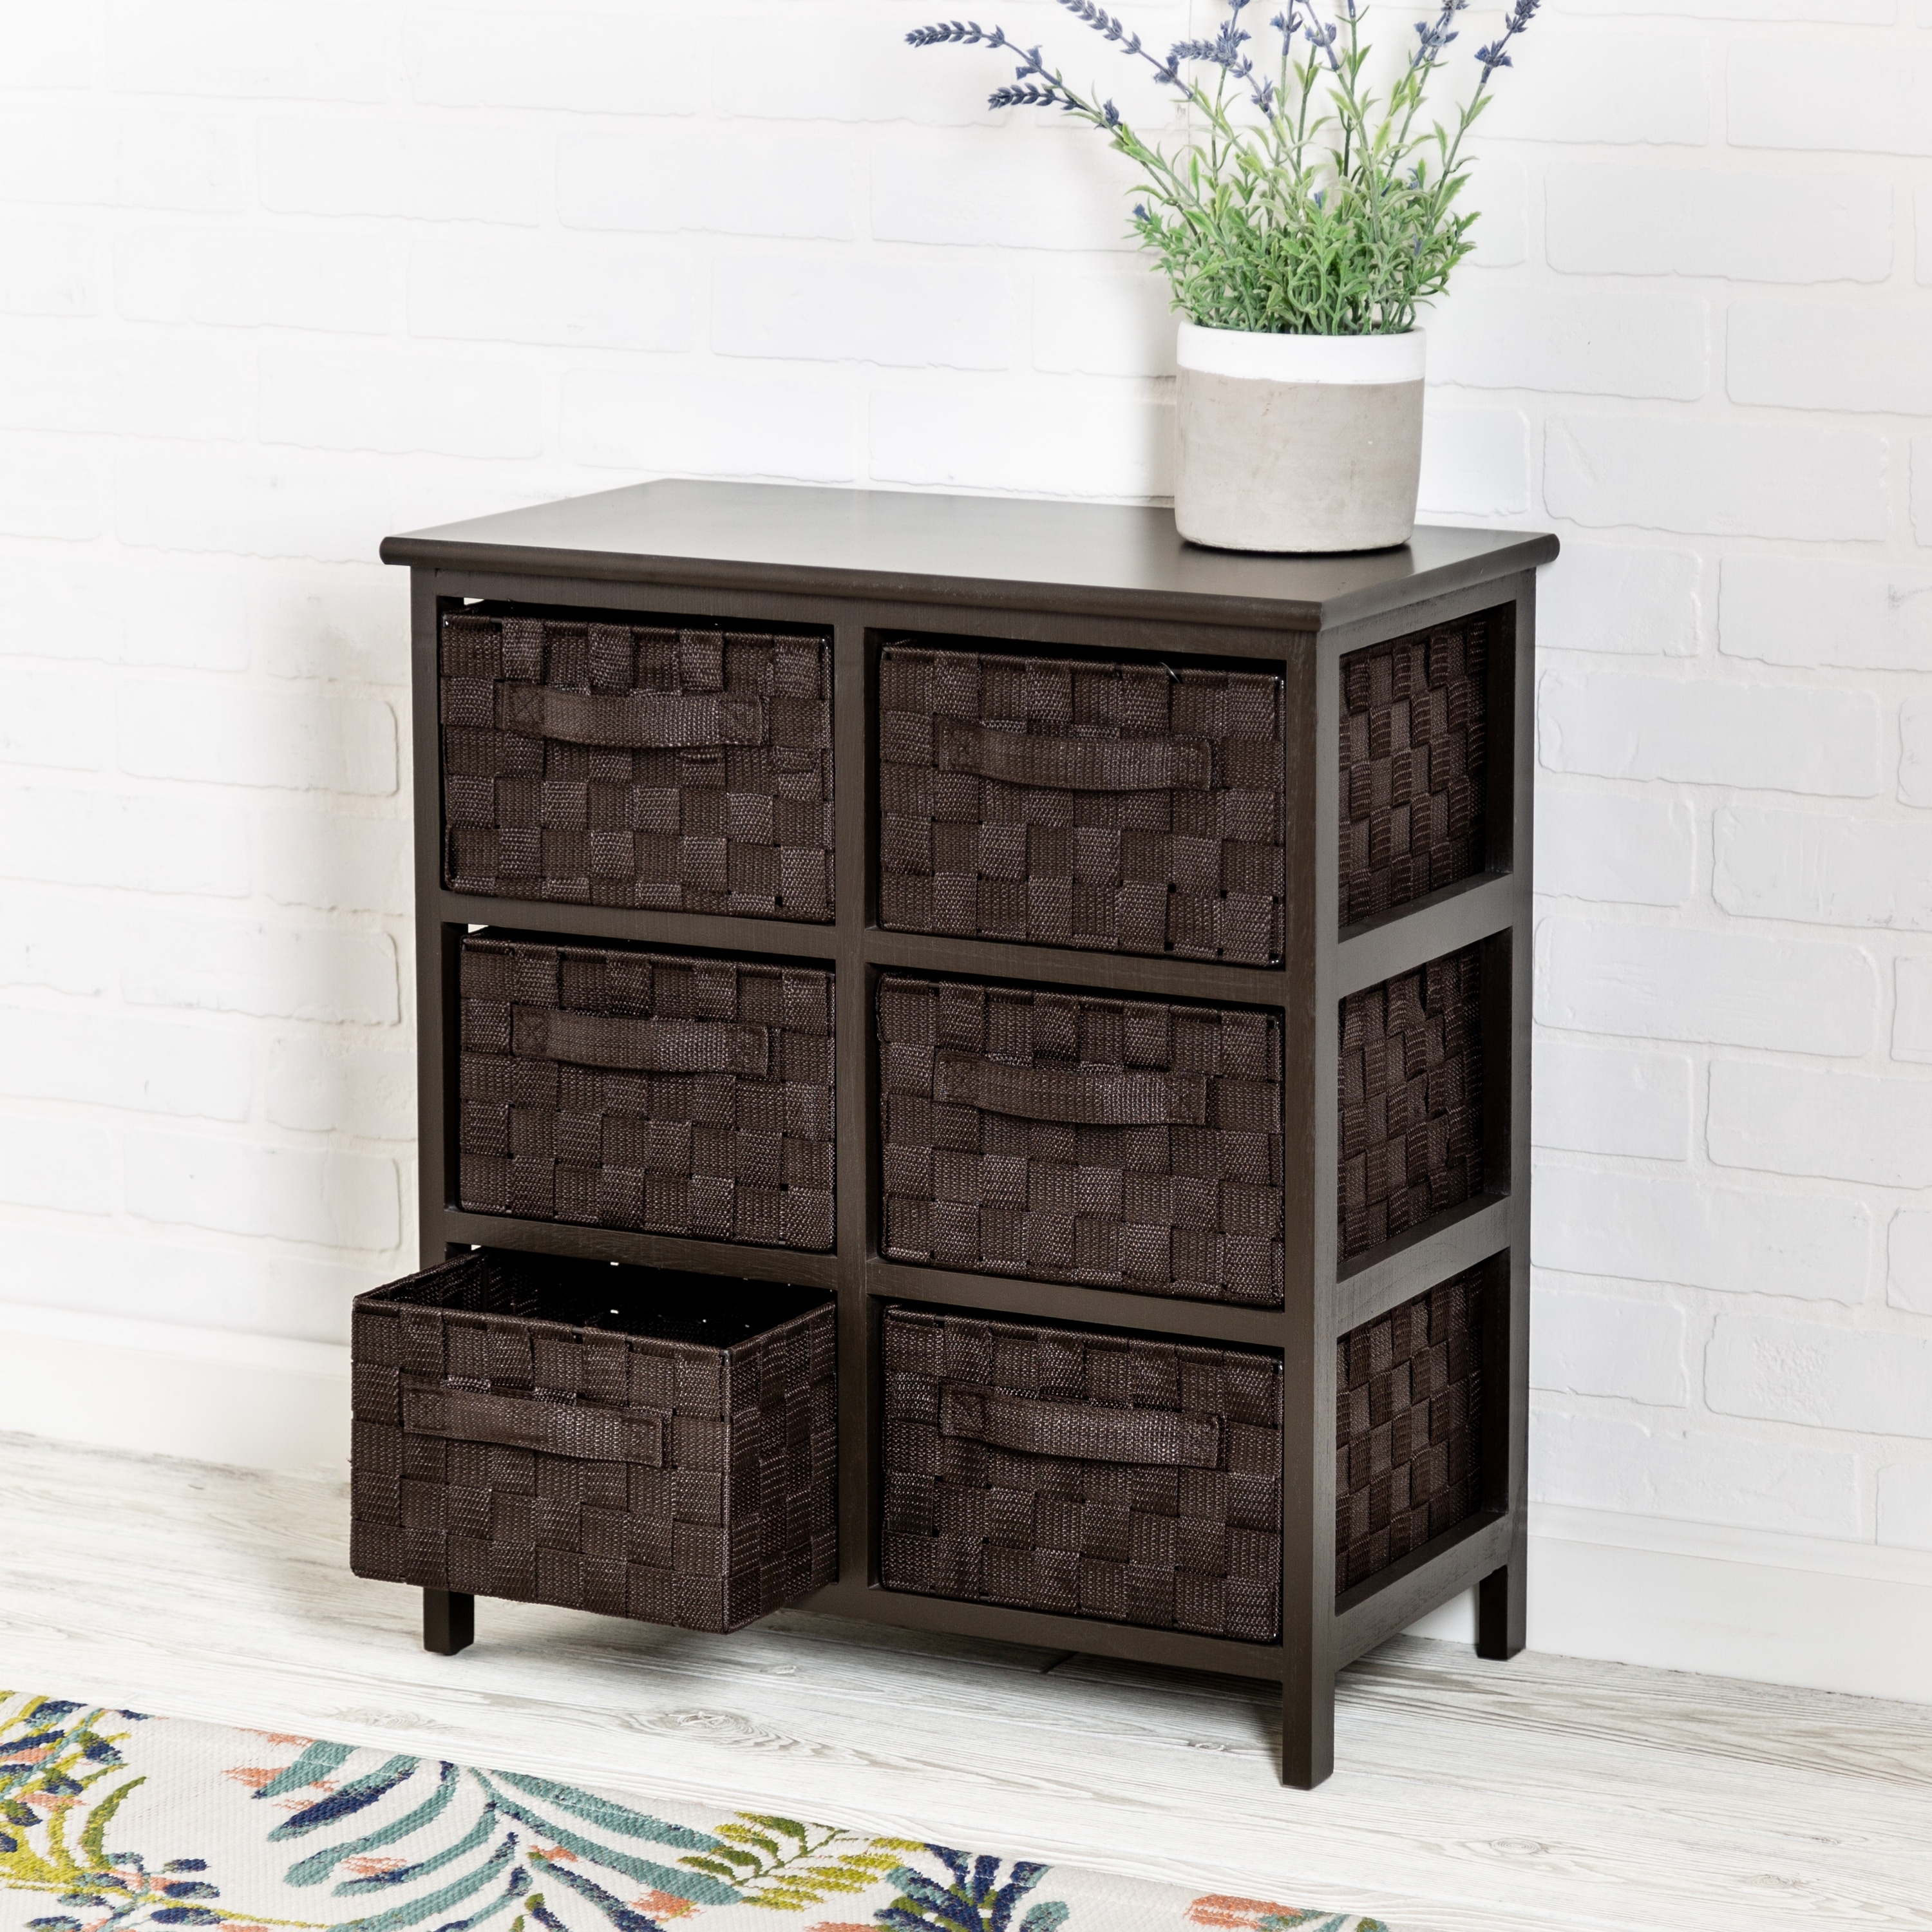 https://ak1.ostkcdn.com/images/products/is/images/direct/3125d3ce977f01d60d1ef0077d8a558942bde1cf/Honey-Can-Do-Black-Woven-Strap-6-Drawer-Chest.jpg